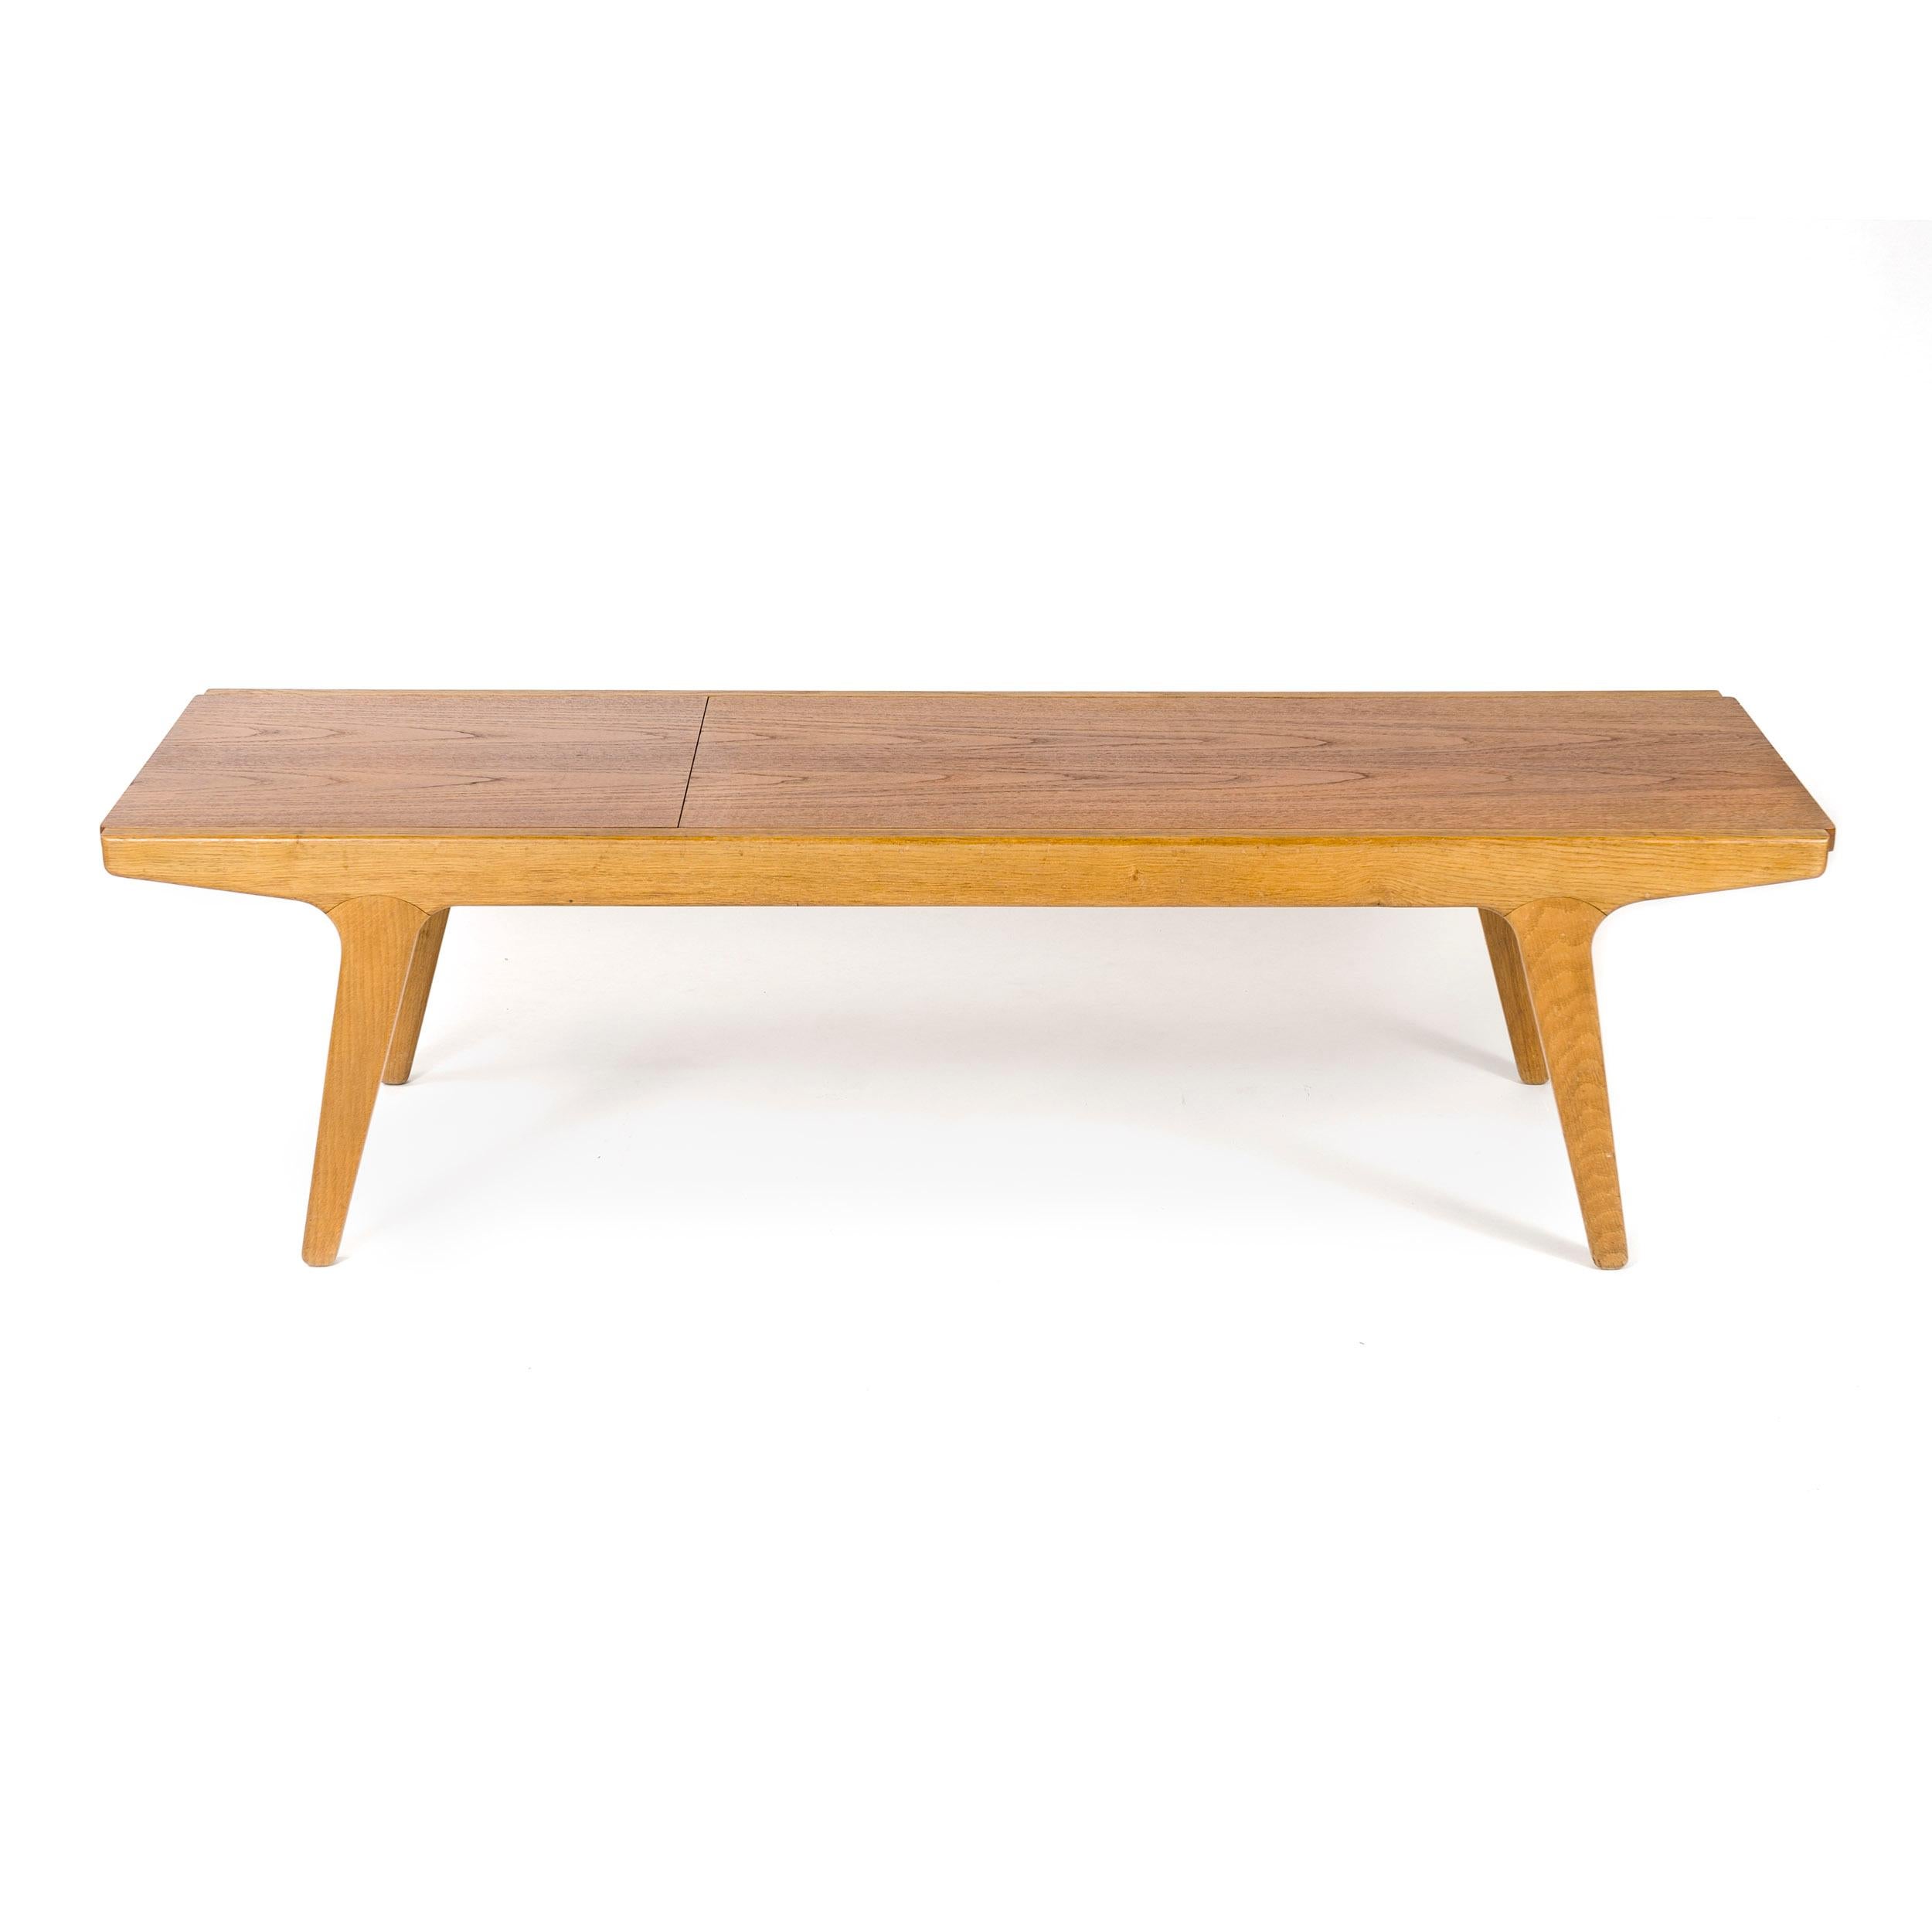 a Danish cabinetmaker quality bench made of oak with a reversible top. the two section top slides on nylon rails built into the frame, the 2 sections slide out from each end of the frame. one side is finished in oiled teak, the opposite side is